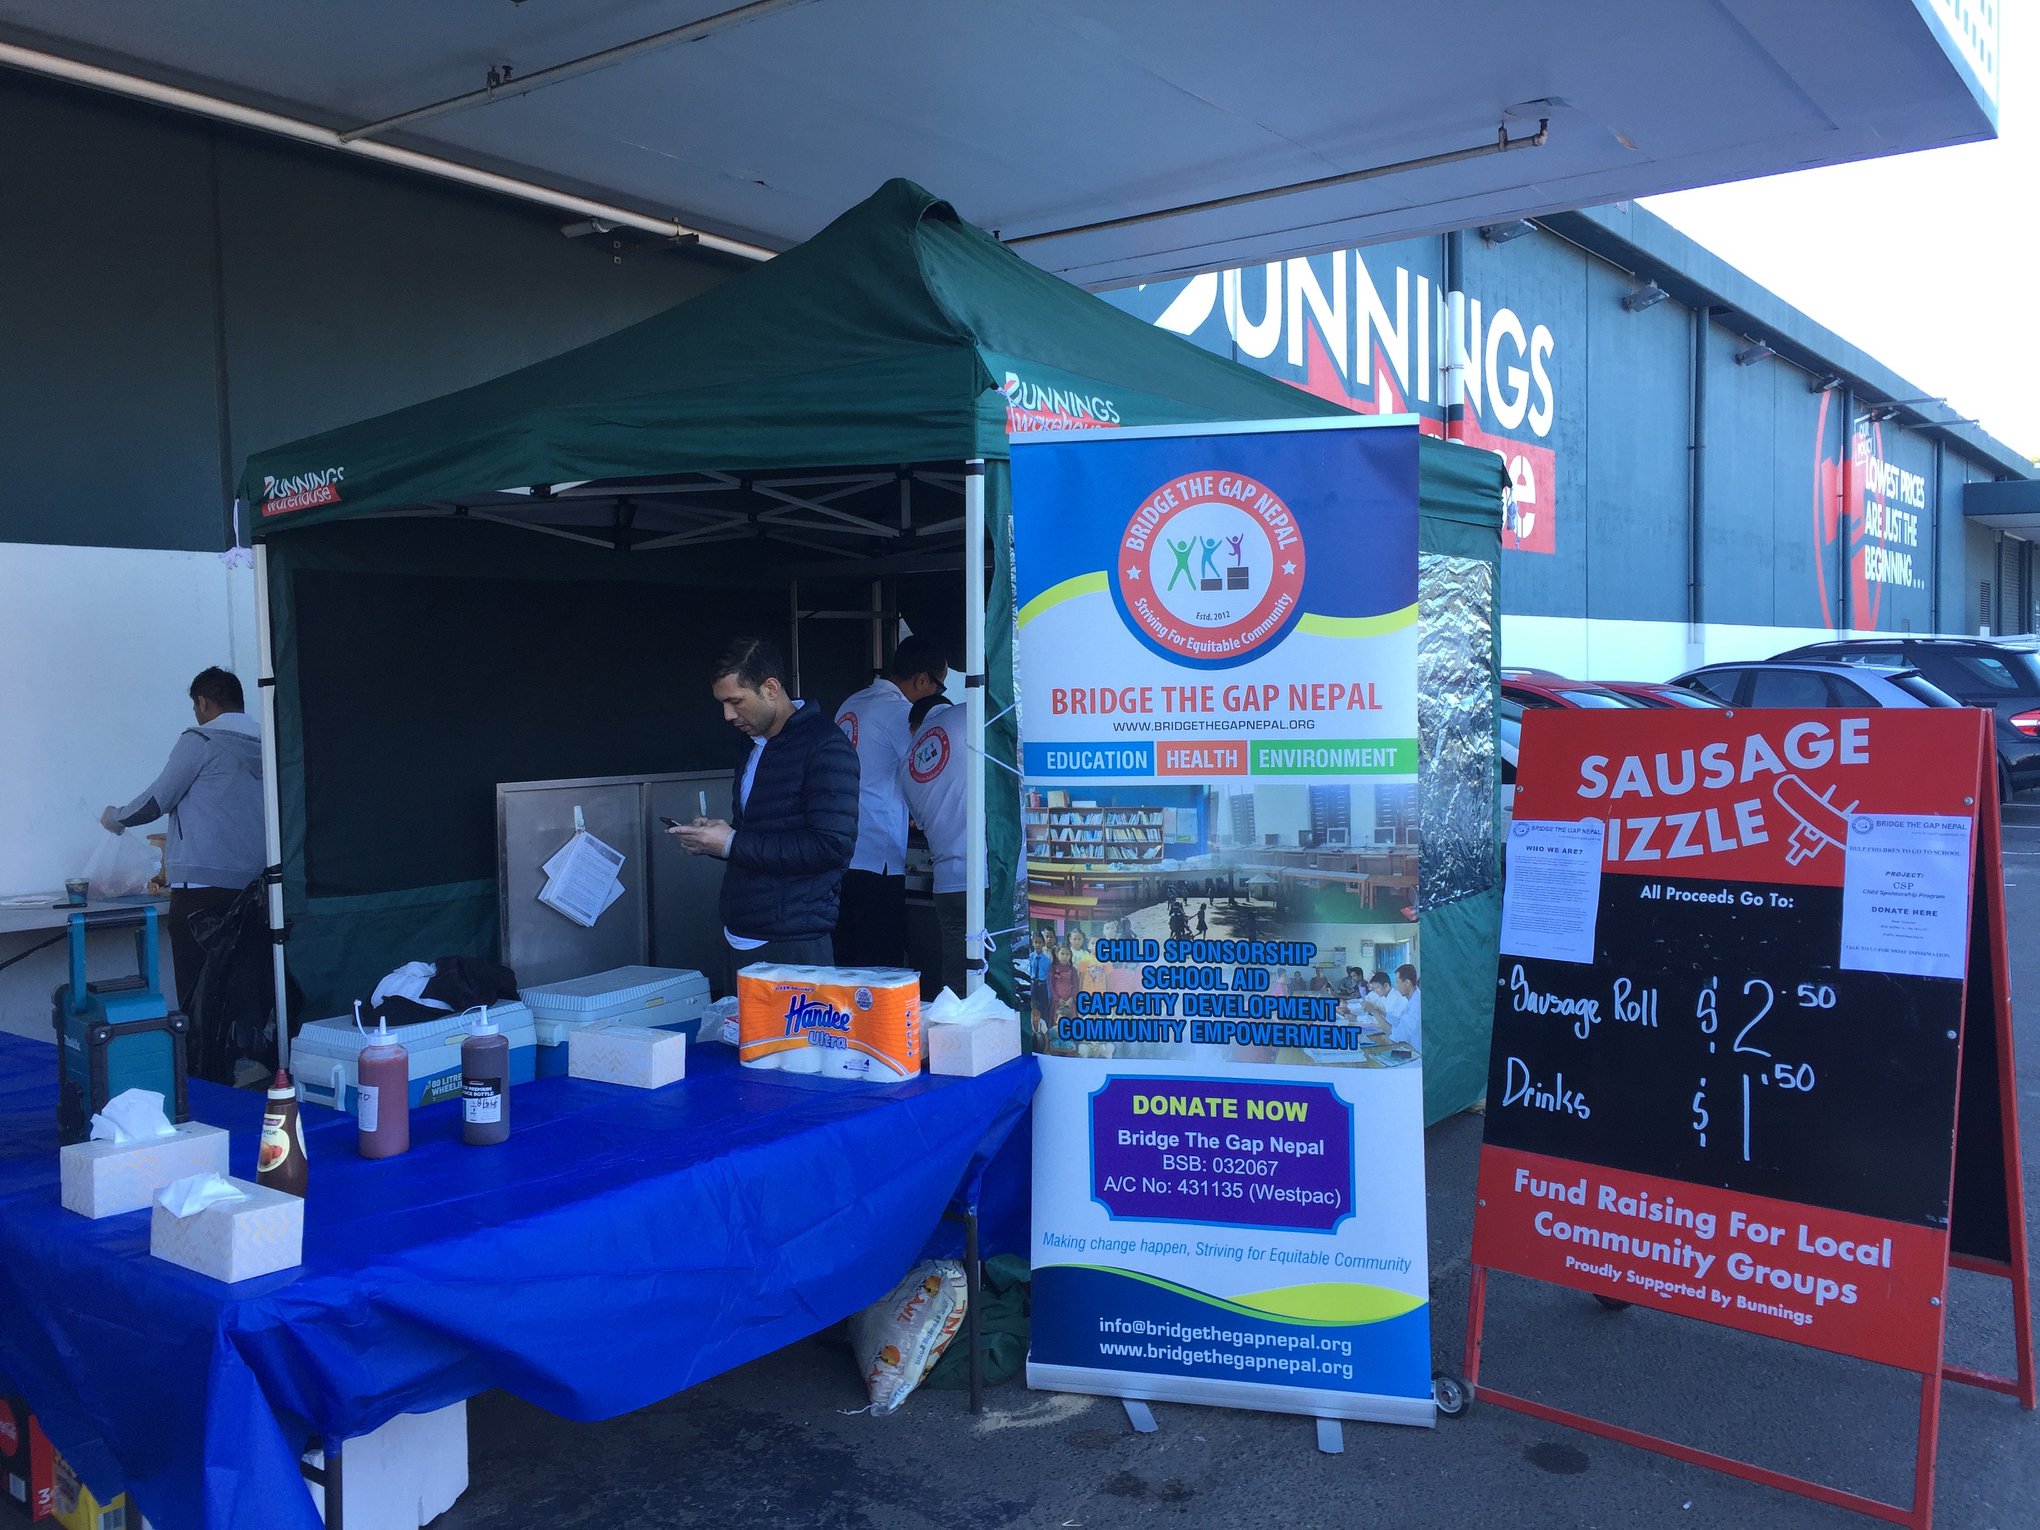 Bunnings Sausage Sizzles